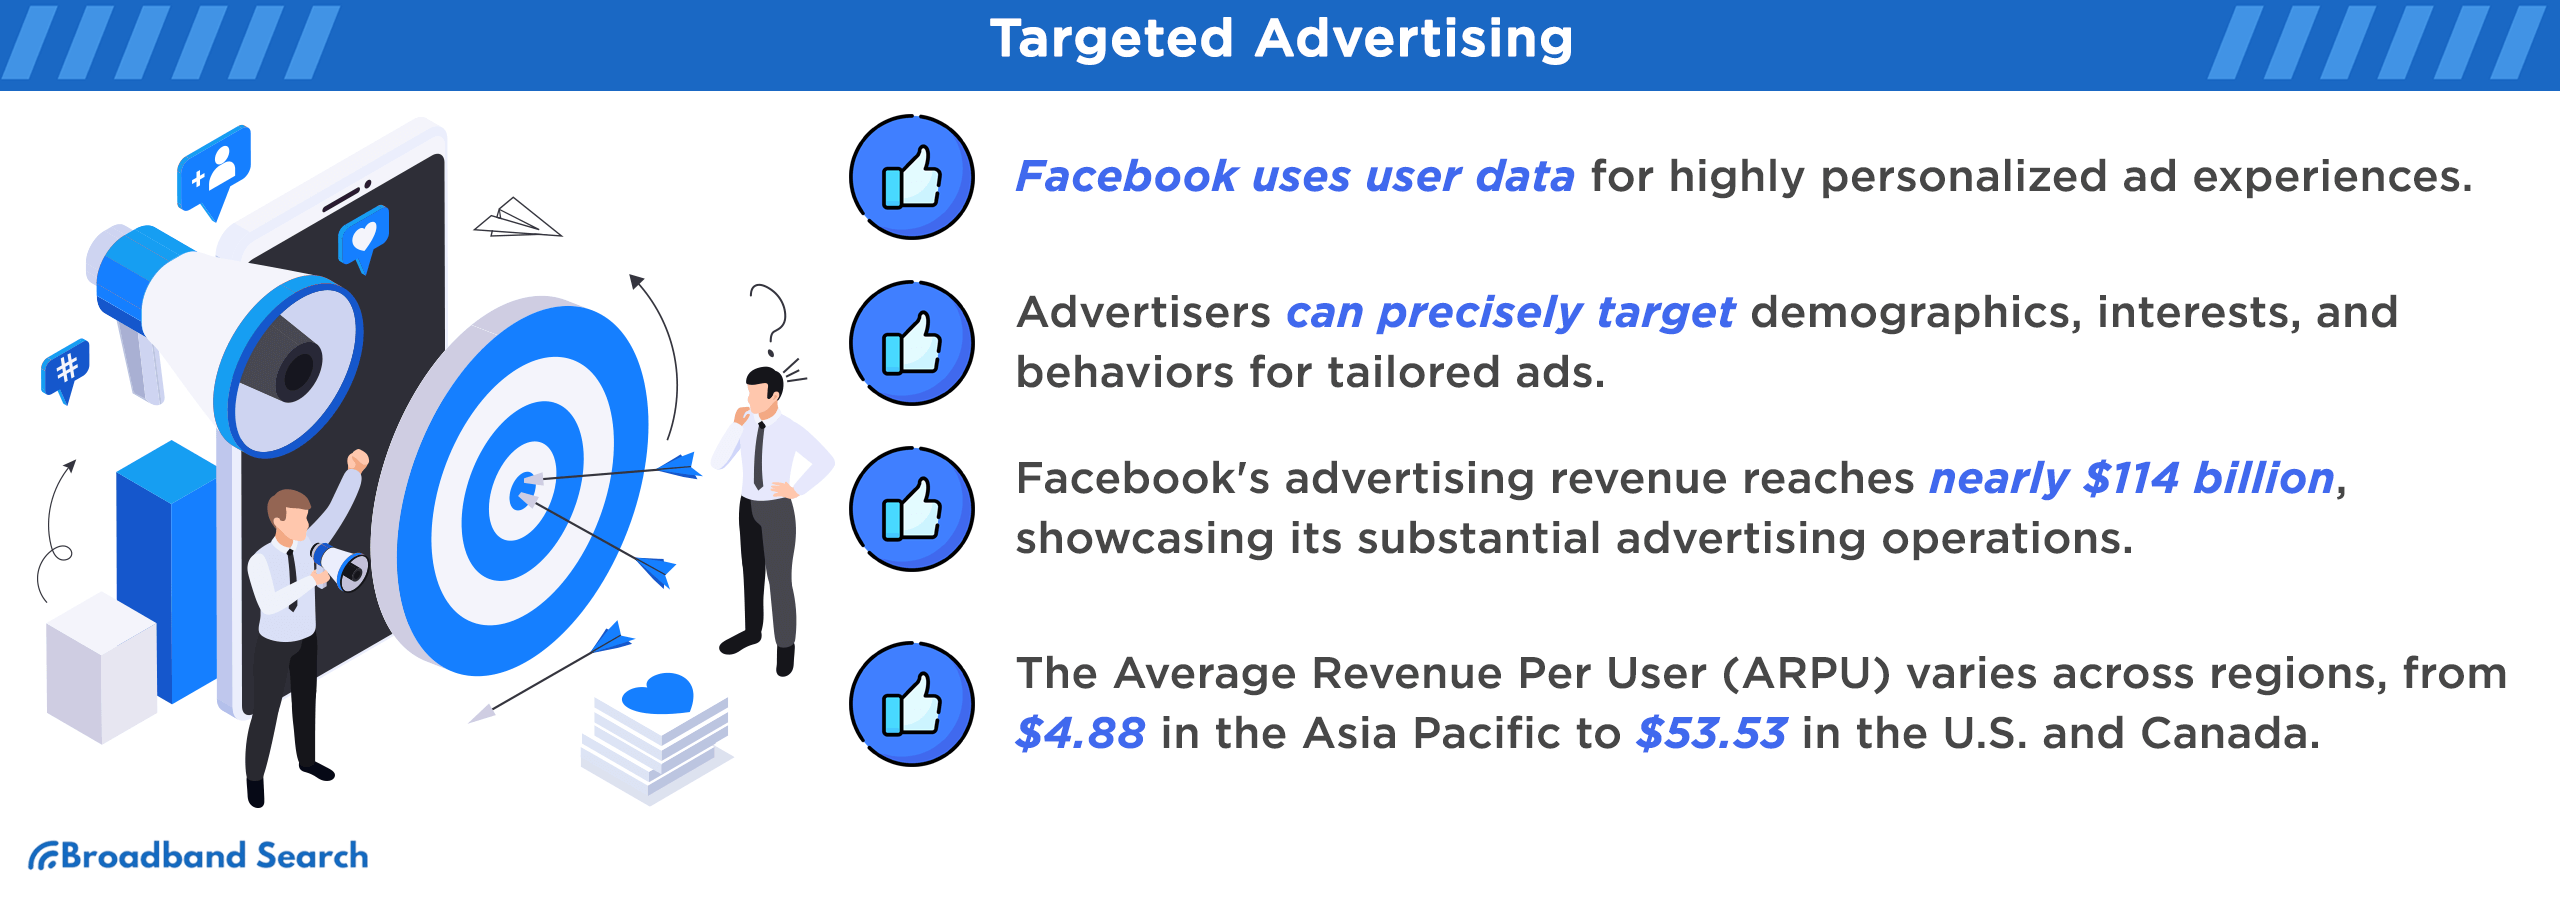 Details on targeted advertising employed by facebook